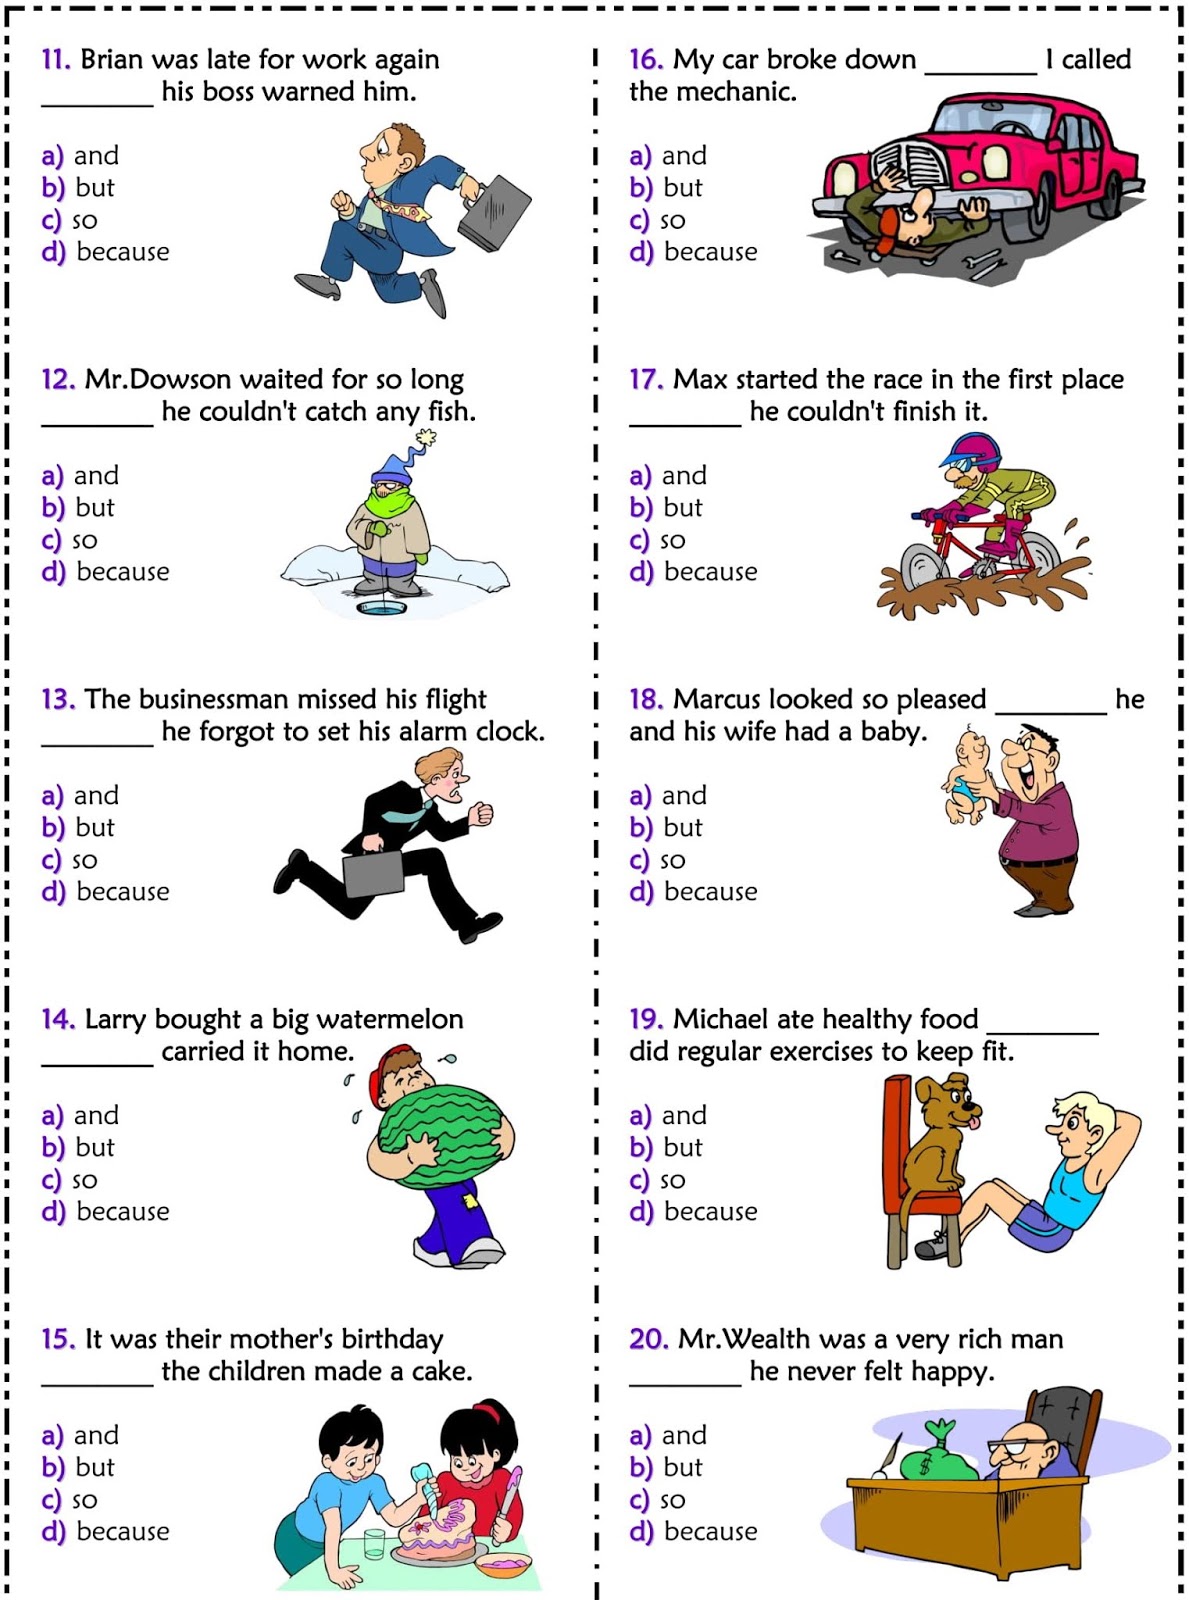 conjunction-and-but-so-because-exercises-english-grammar-a-to-z